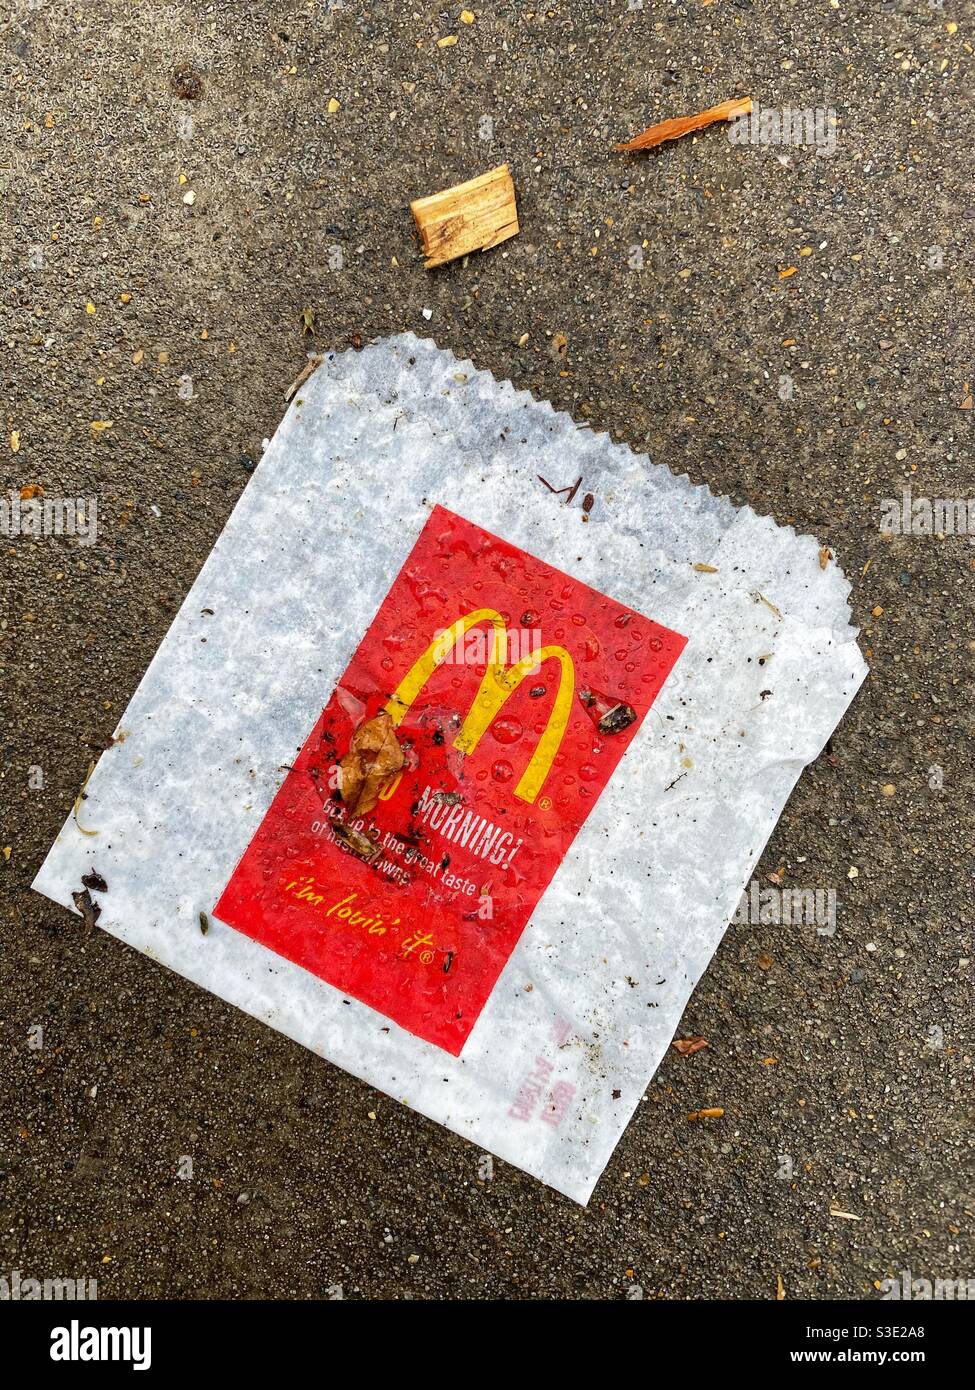 A McDonald's bag littered in the street Stock Photo